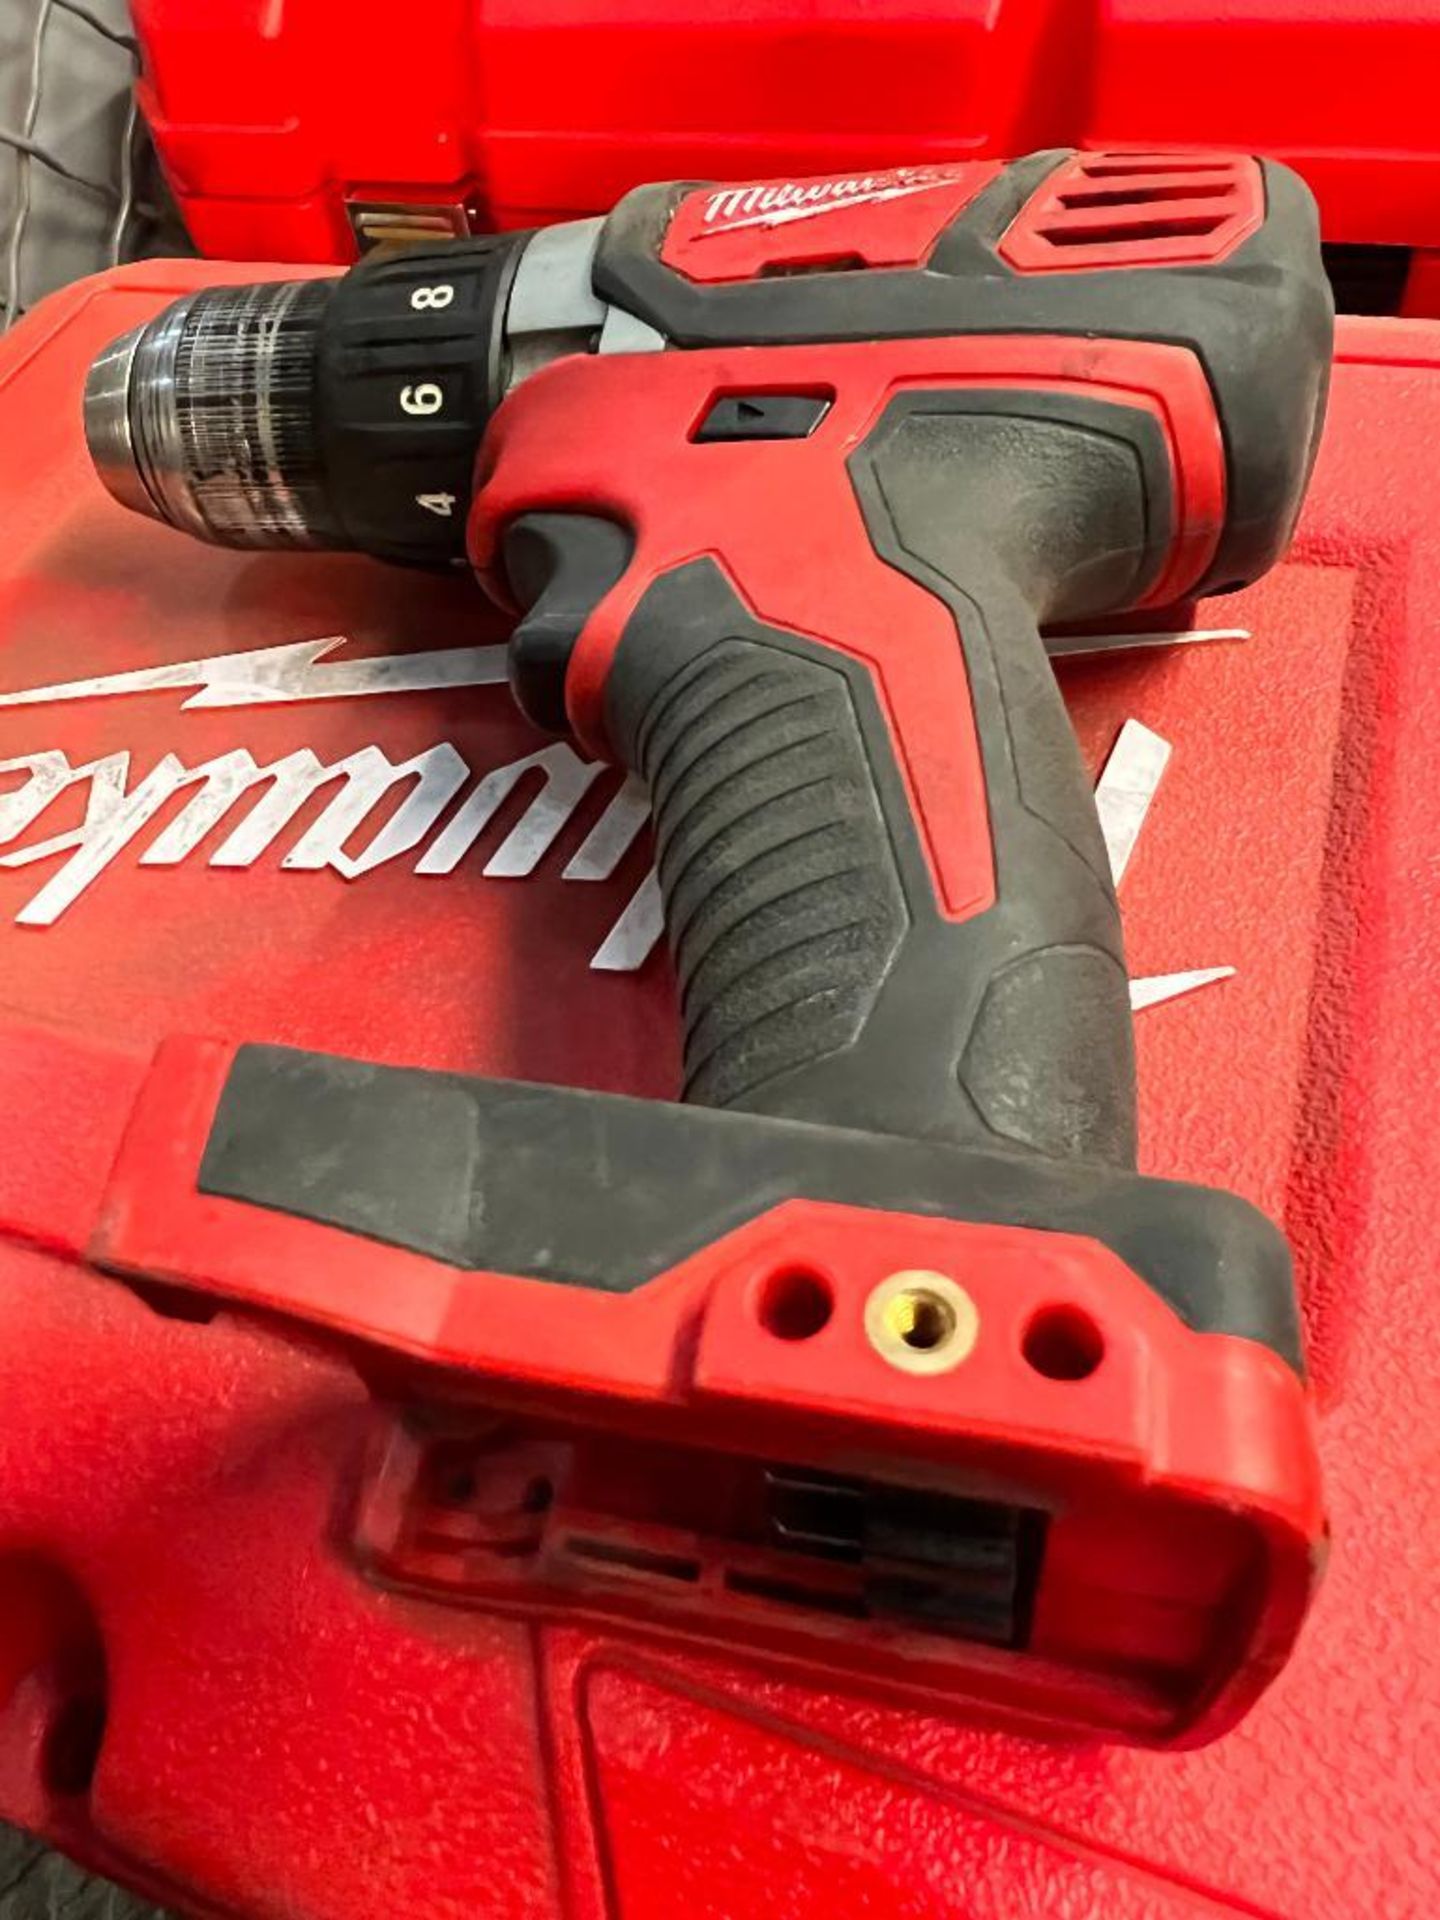 Milwaukee 18 V 1/2" Drill, S/N S2400 X 16409556 - Image 2 of 2